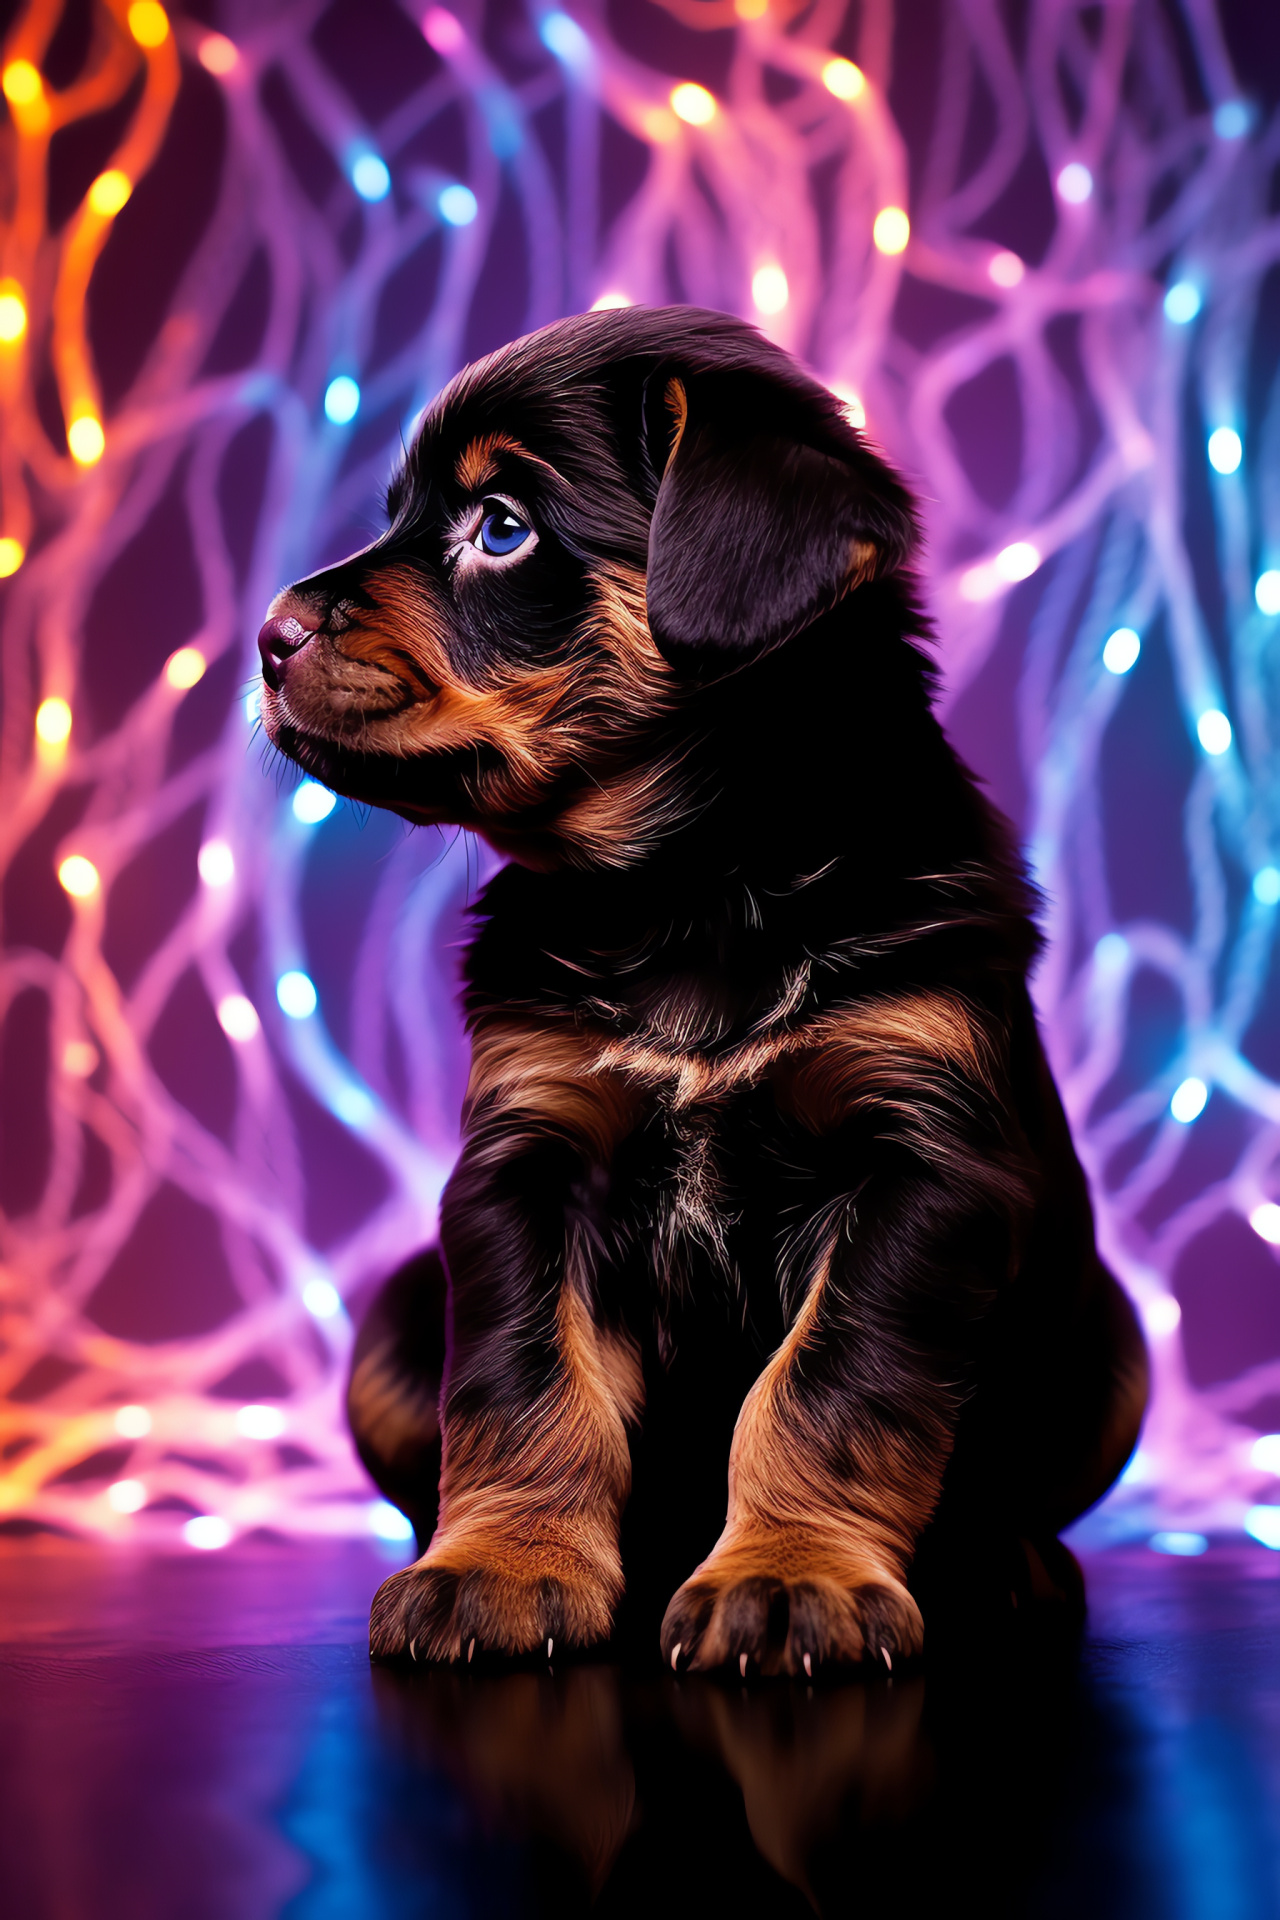 Playful Rottweiler Puppy, Young dog, Animated expression, Neon abstraction, Vivid animal scene, HD Phone Image